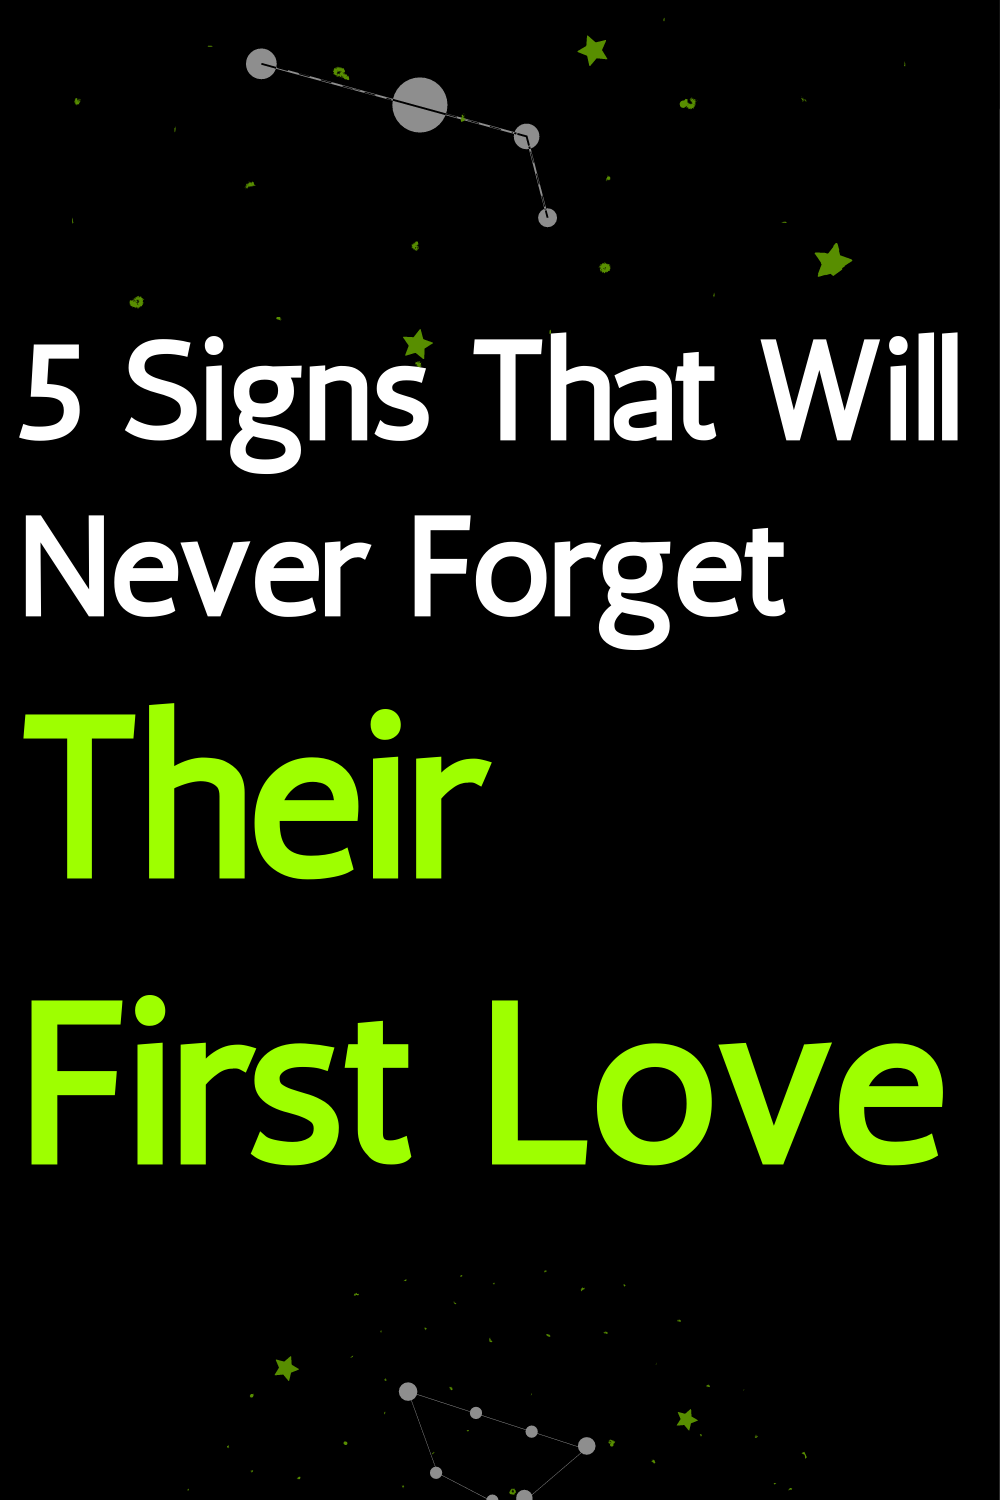 5 Signs That Will Never Forget Their First Love